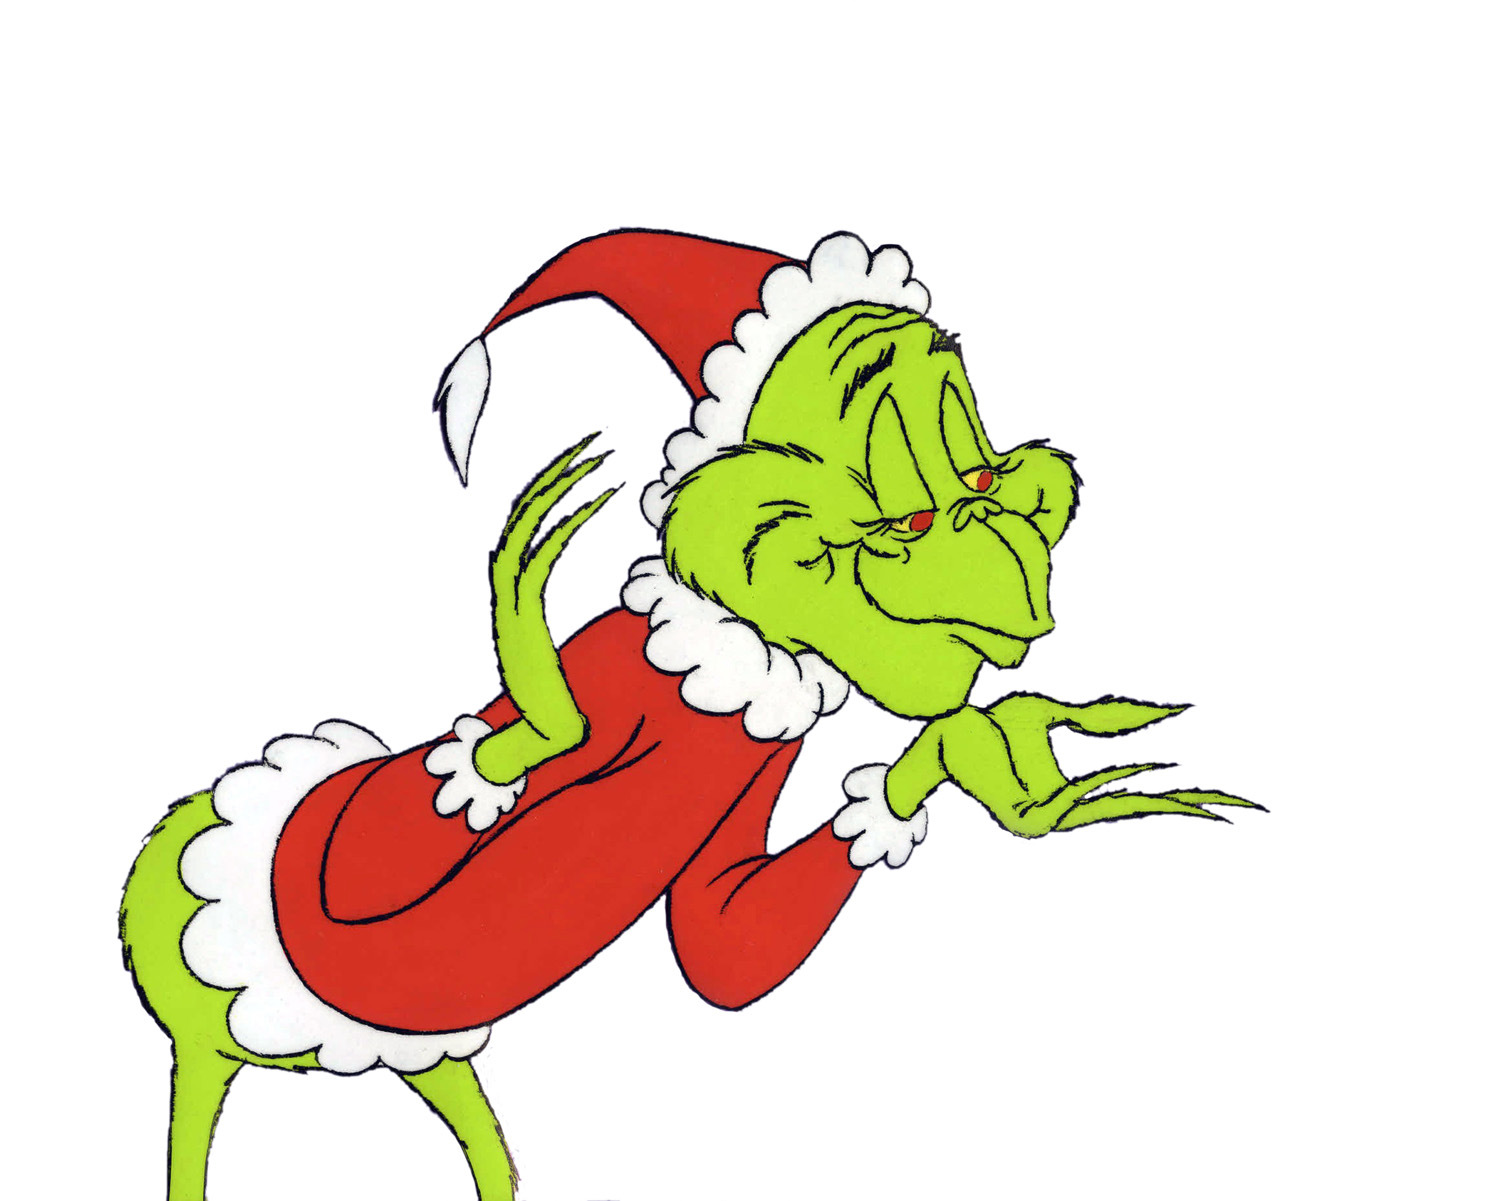 The Grinch :)